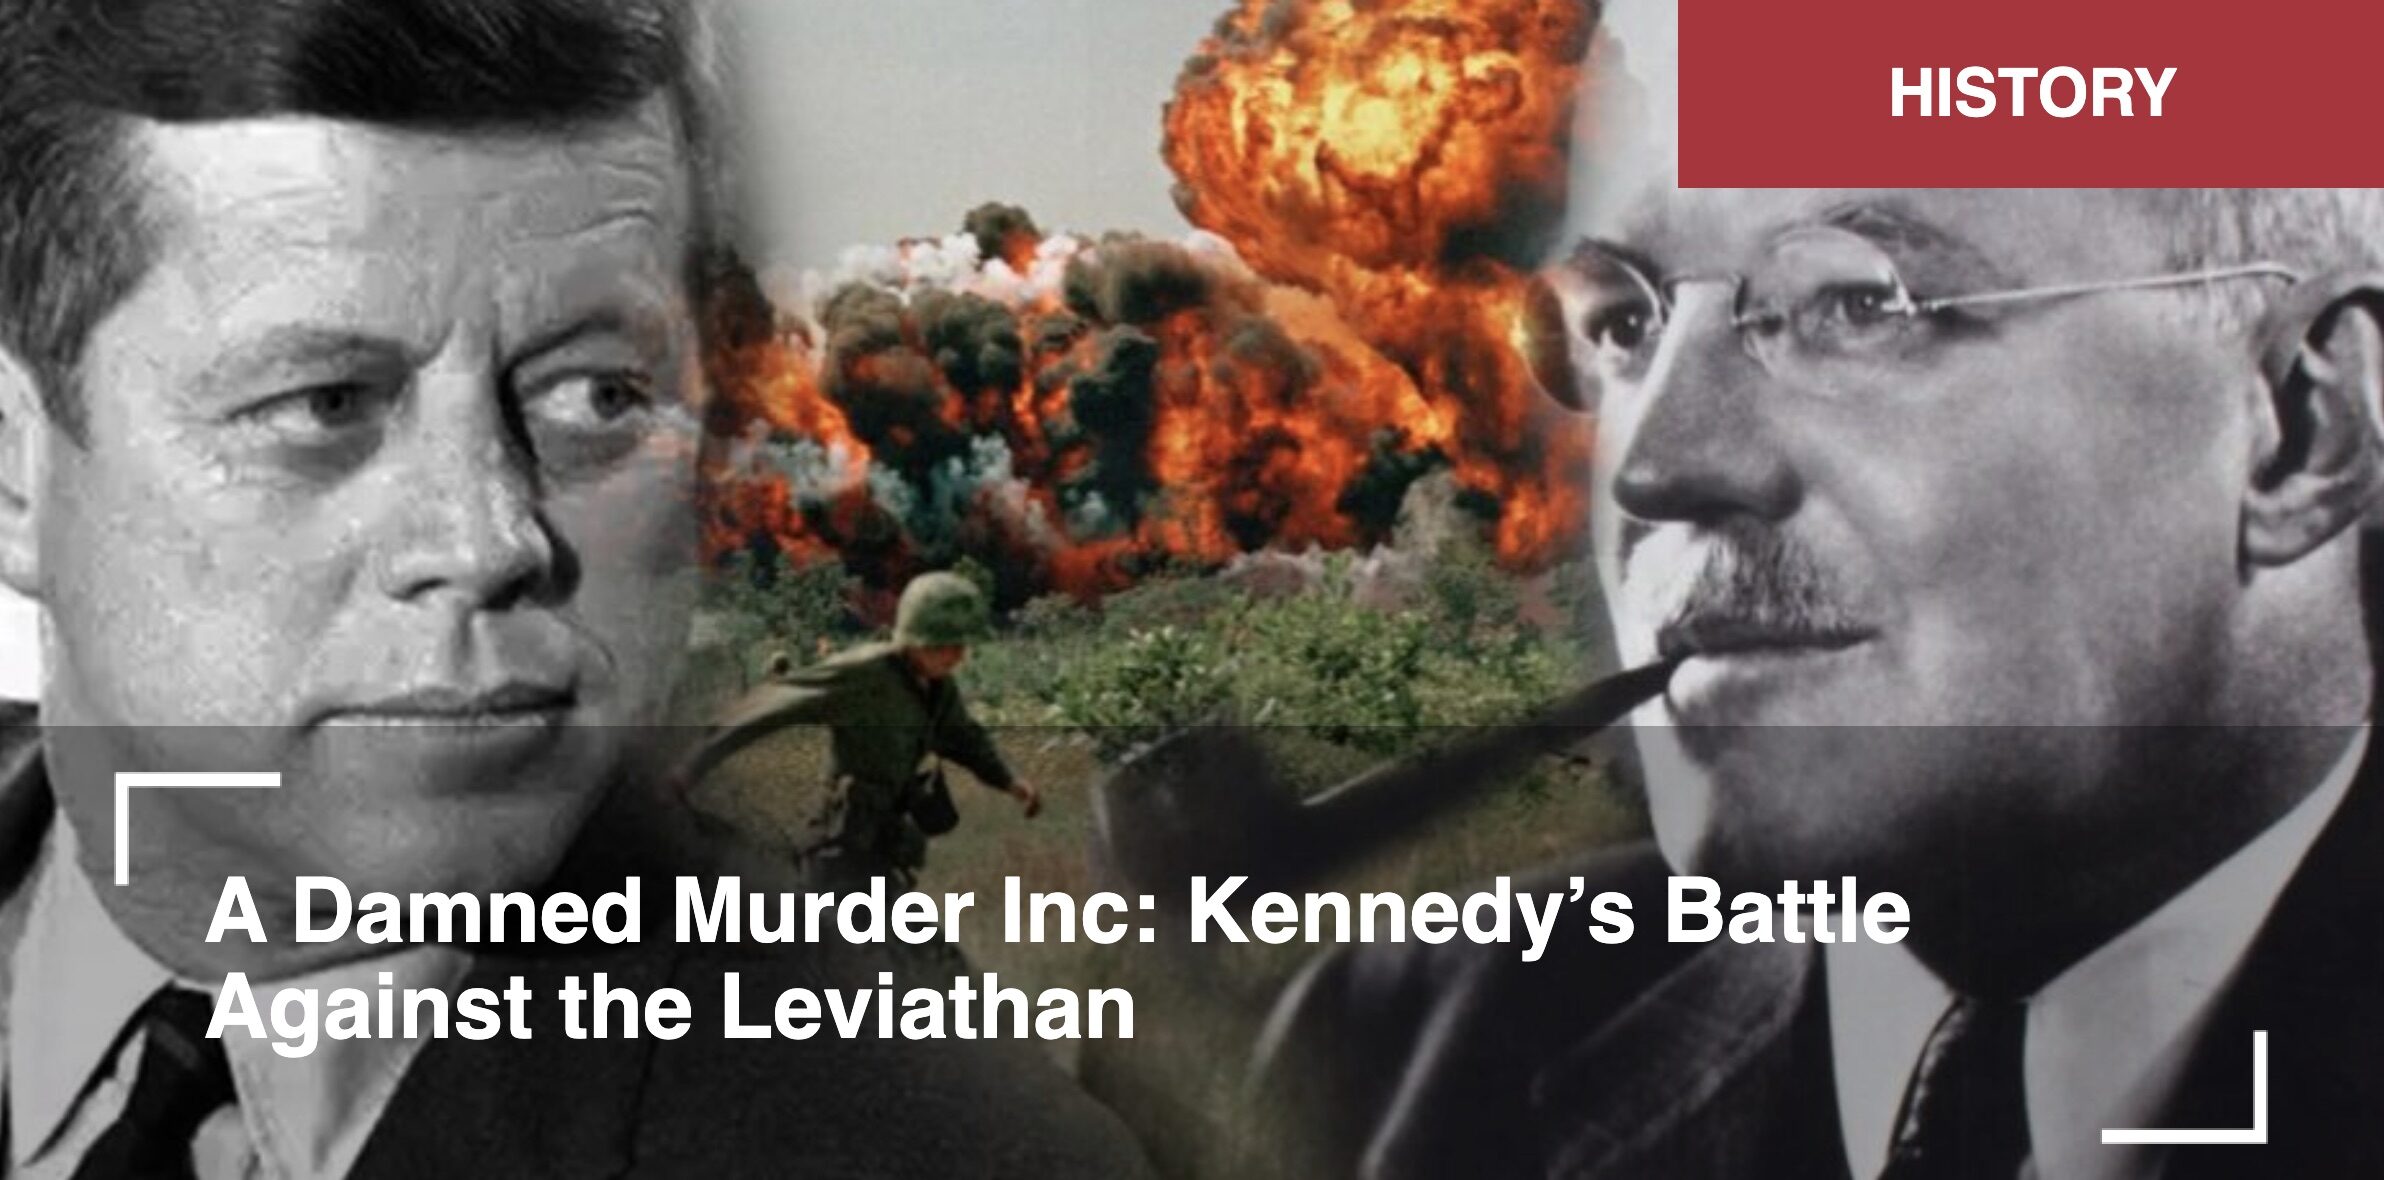 A Damned Murder Inc: Kennedy's Battle Against the Leviathan